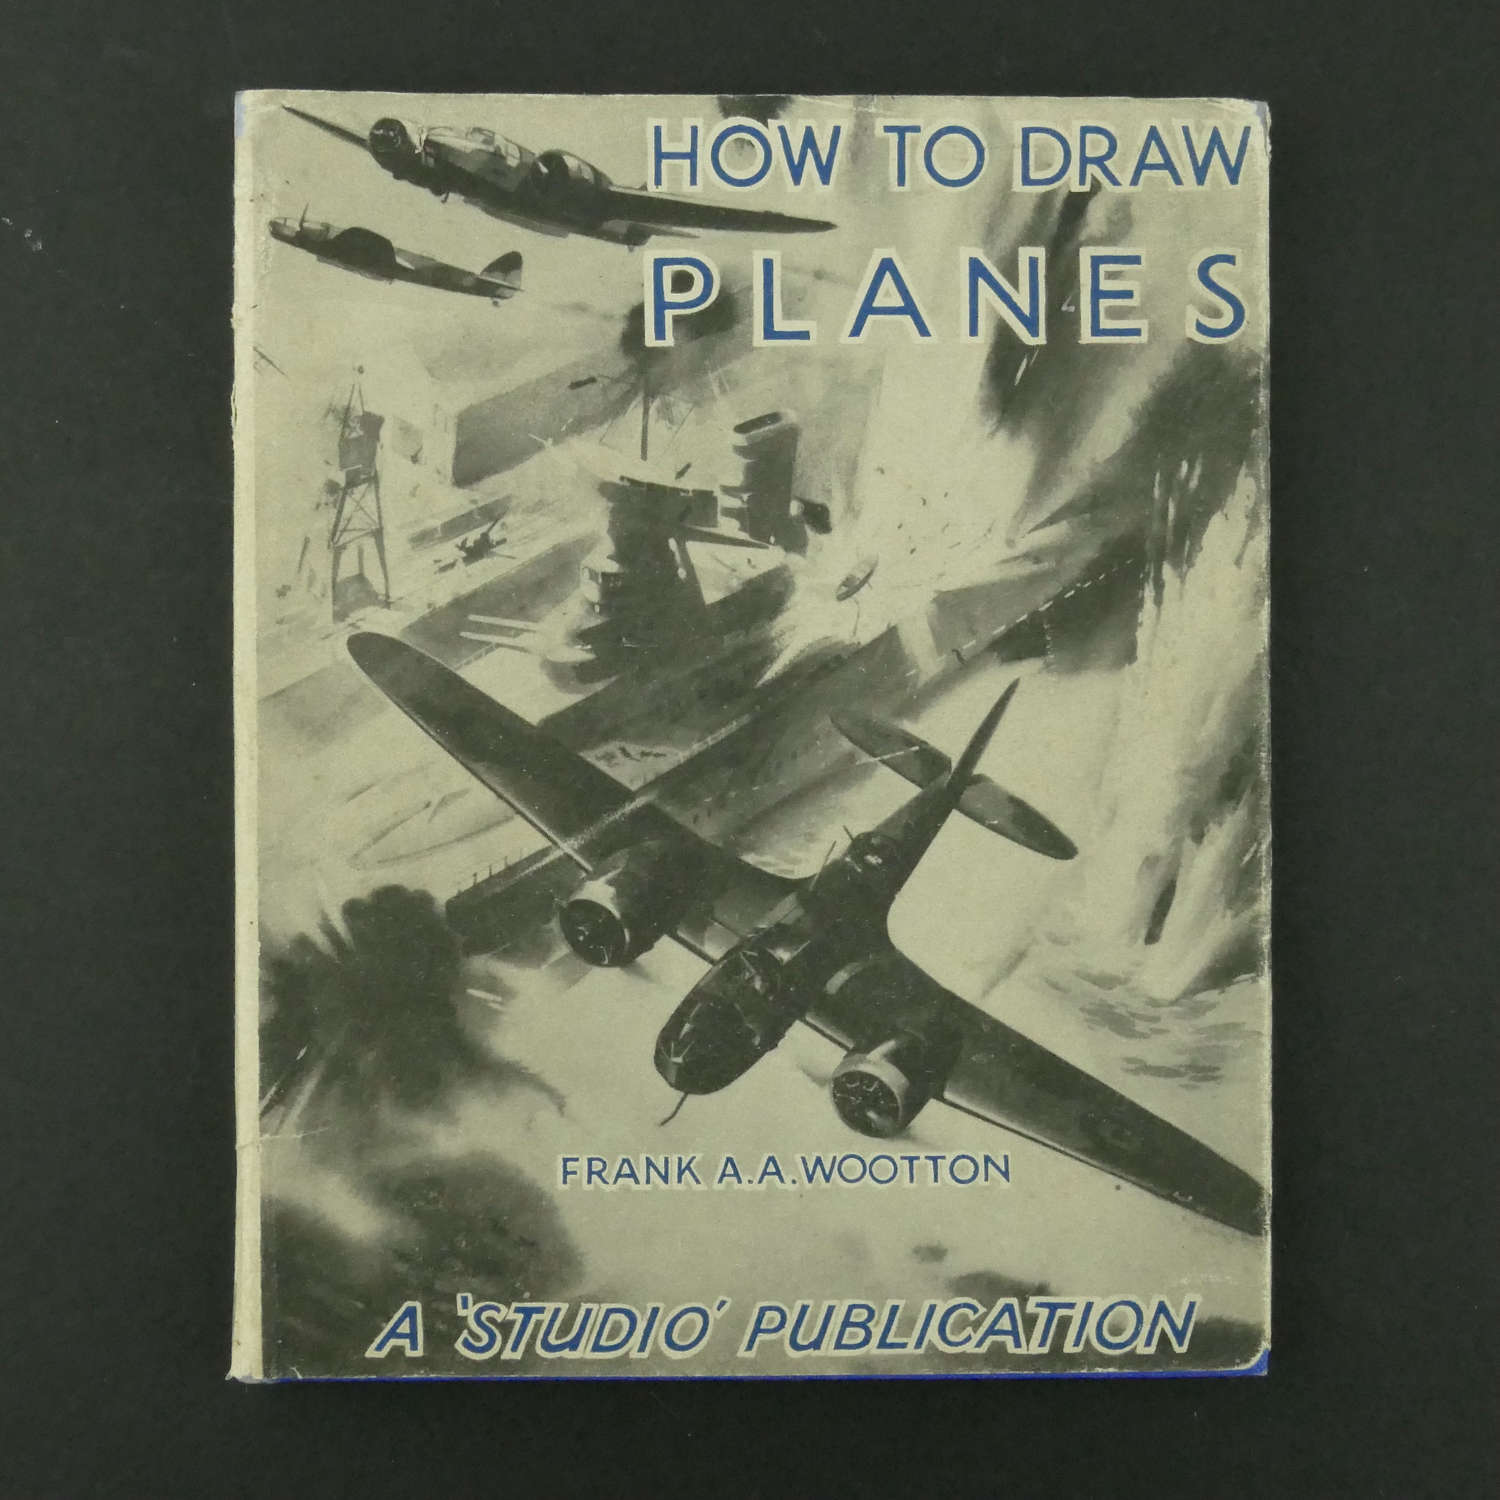 How To Draw Planes, 1943